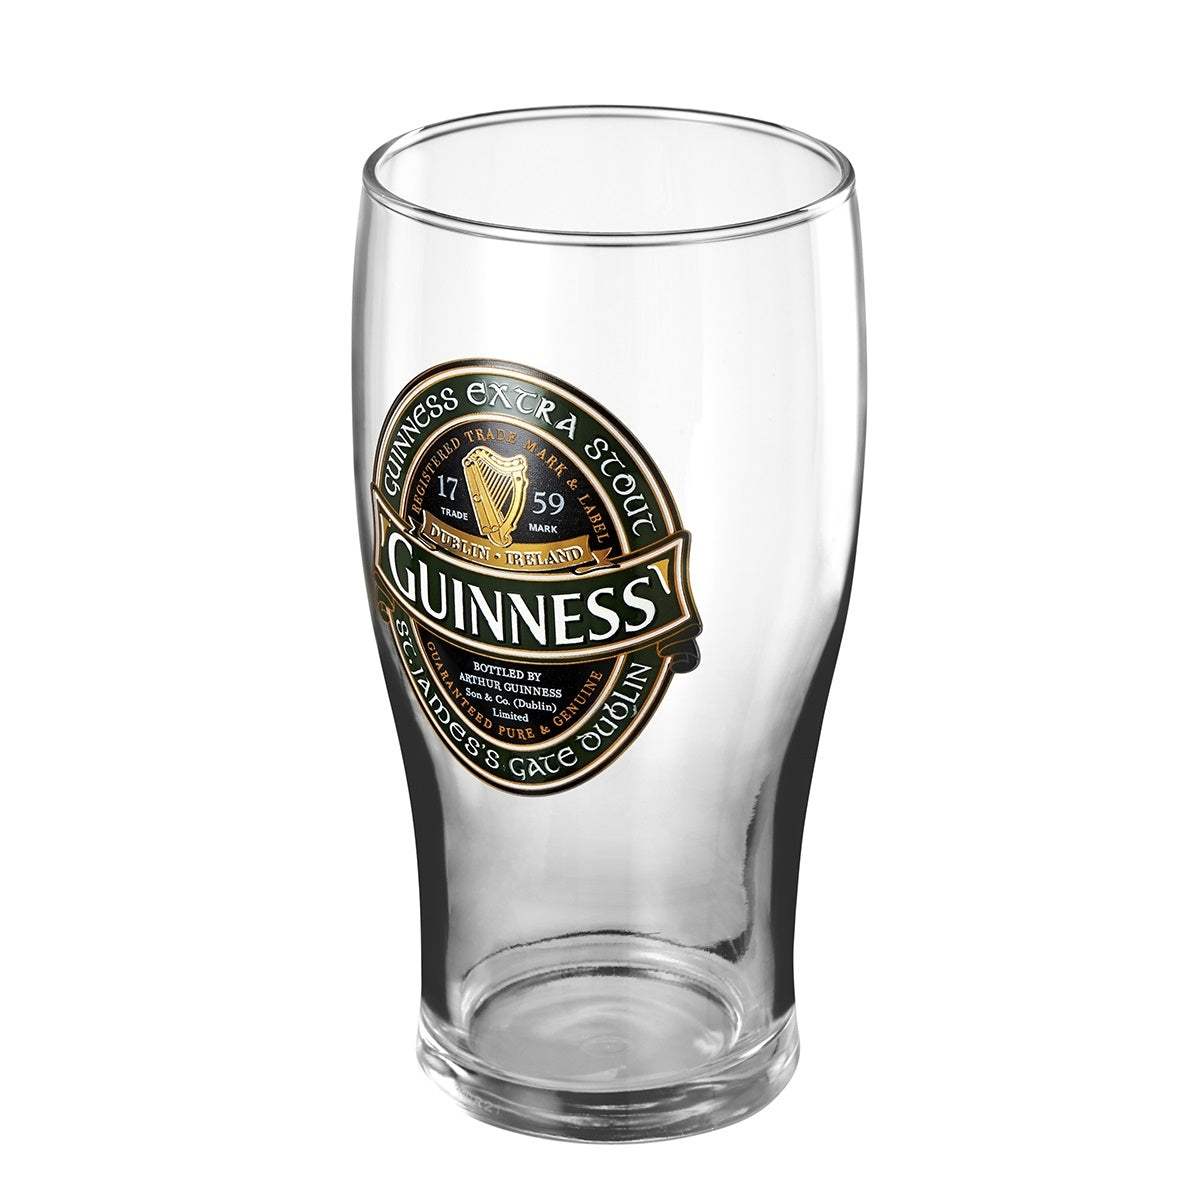 Guinness Ireland Collection Pint Glass 4 Pack, Guinness